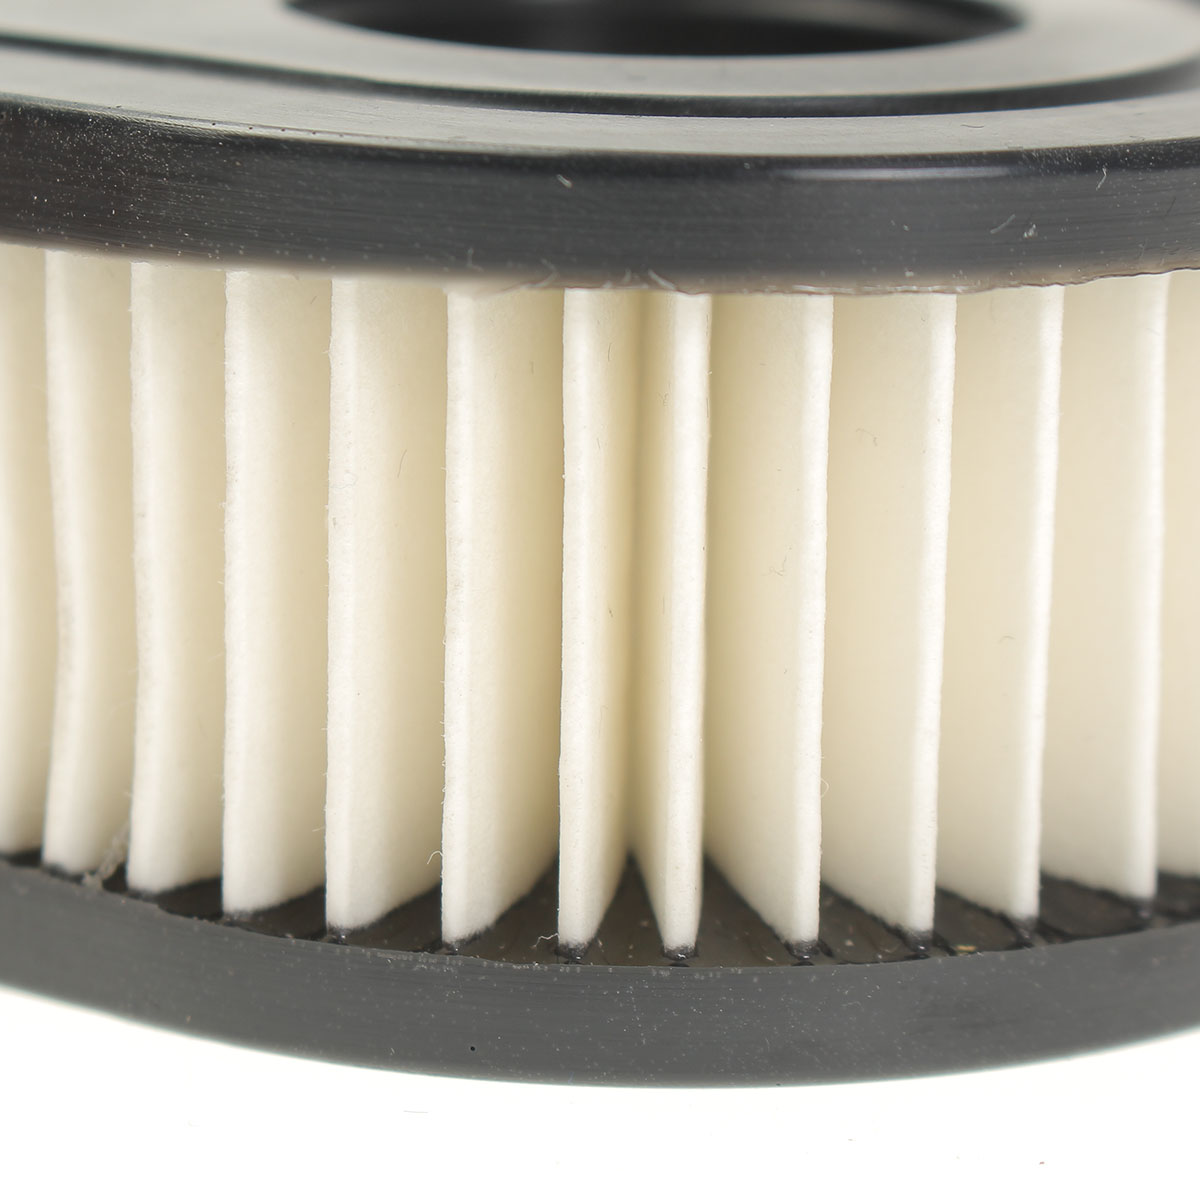 Lawn-Mower-Air-Filter-For-Briggs-Stratton-798452-5432-5432K-593260-1063308